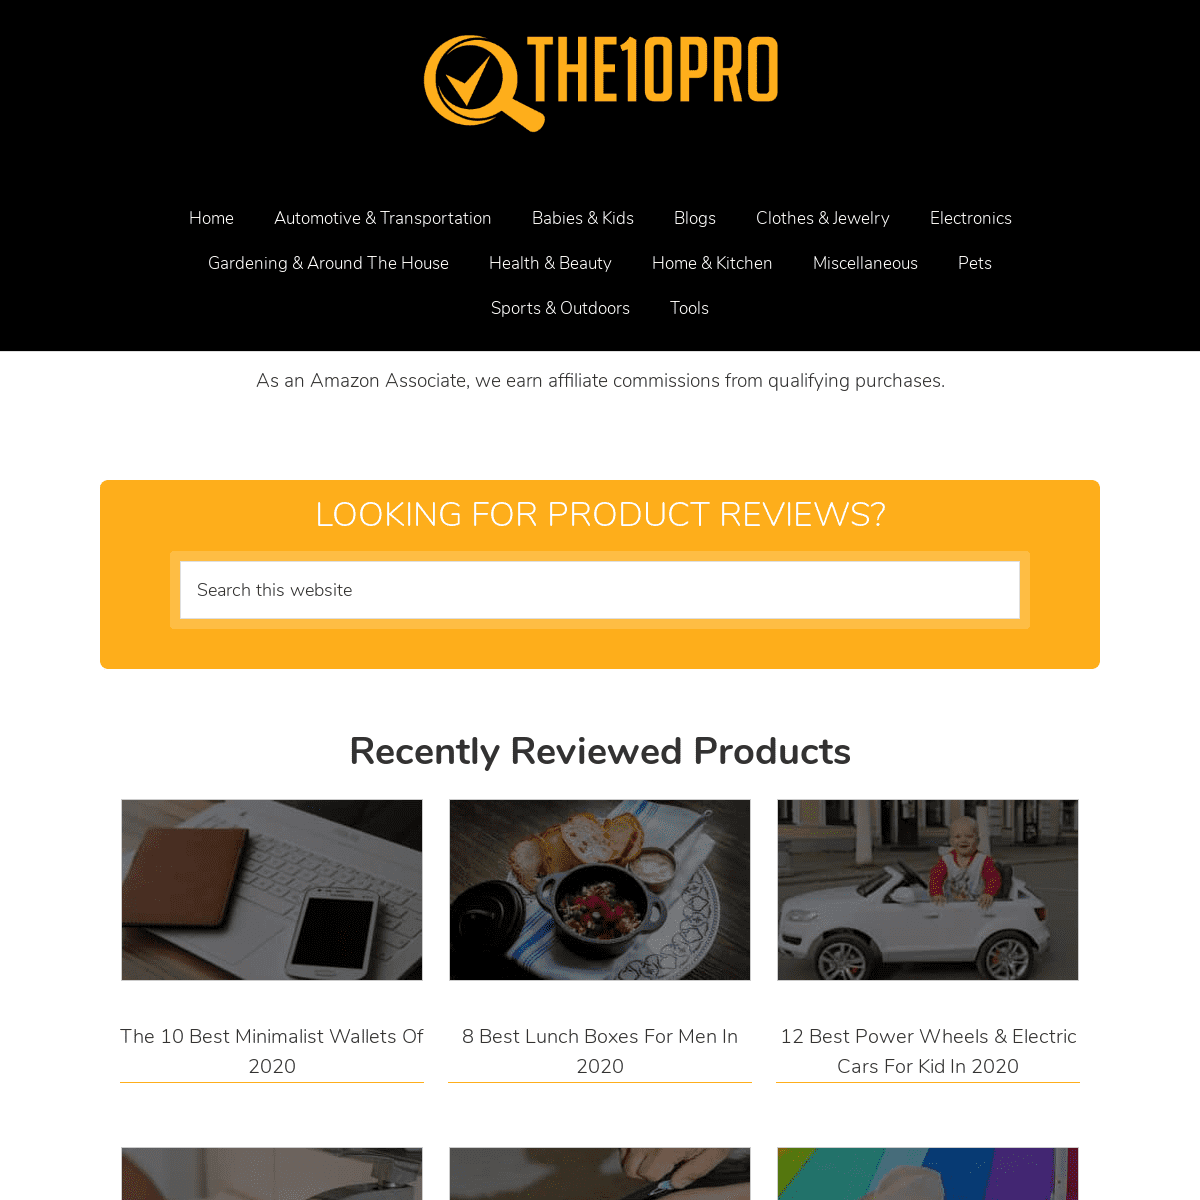 A complete backup of the10pro.com